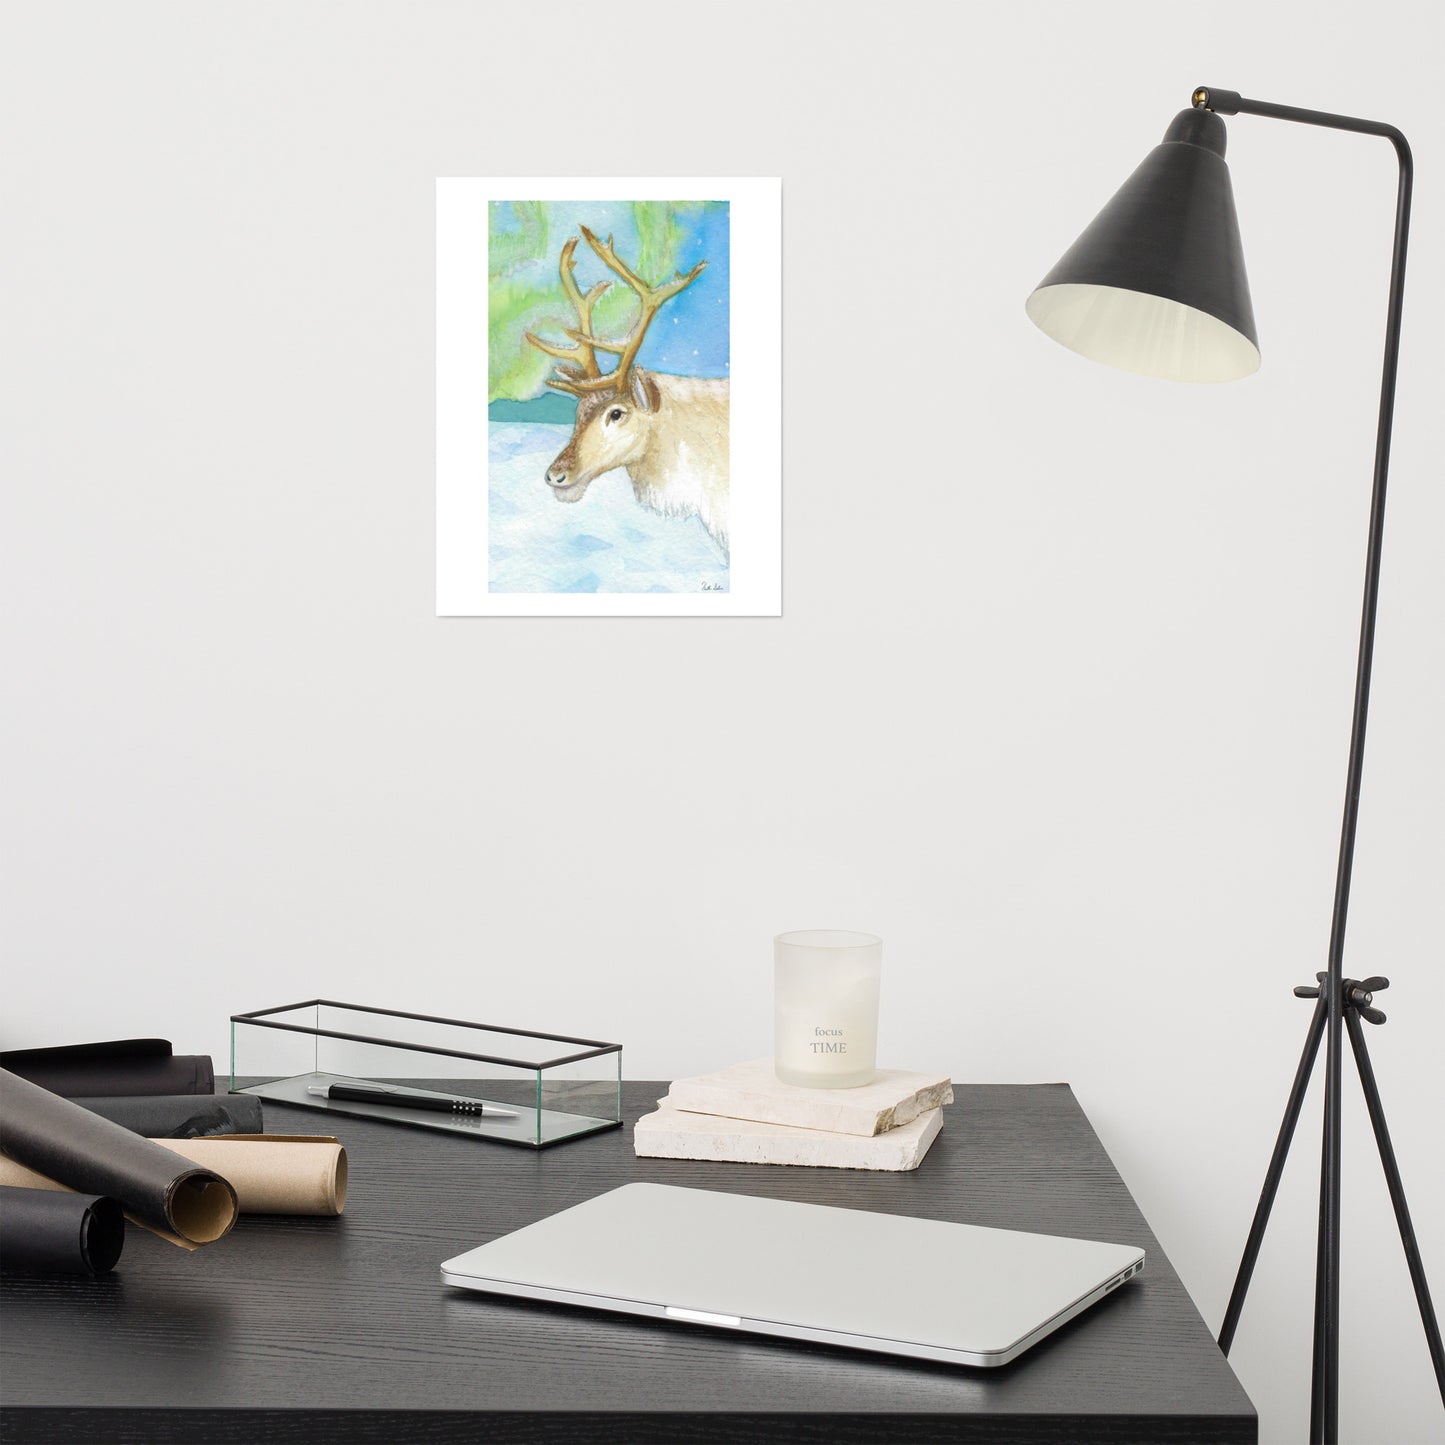 11 by 14 inch art poster print. Watercolor painting of a snowy reindeer with the northern lights in the background. Shown on the wall above a grey desk and lamp.